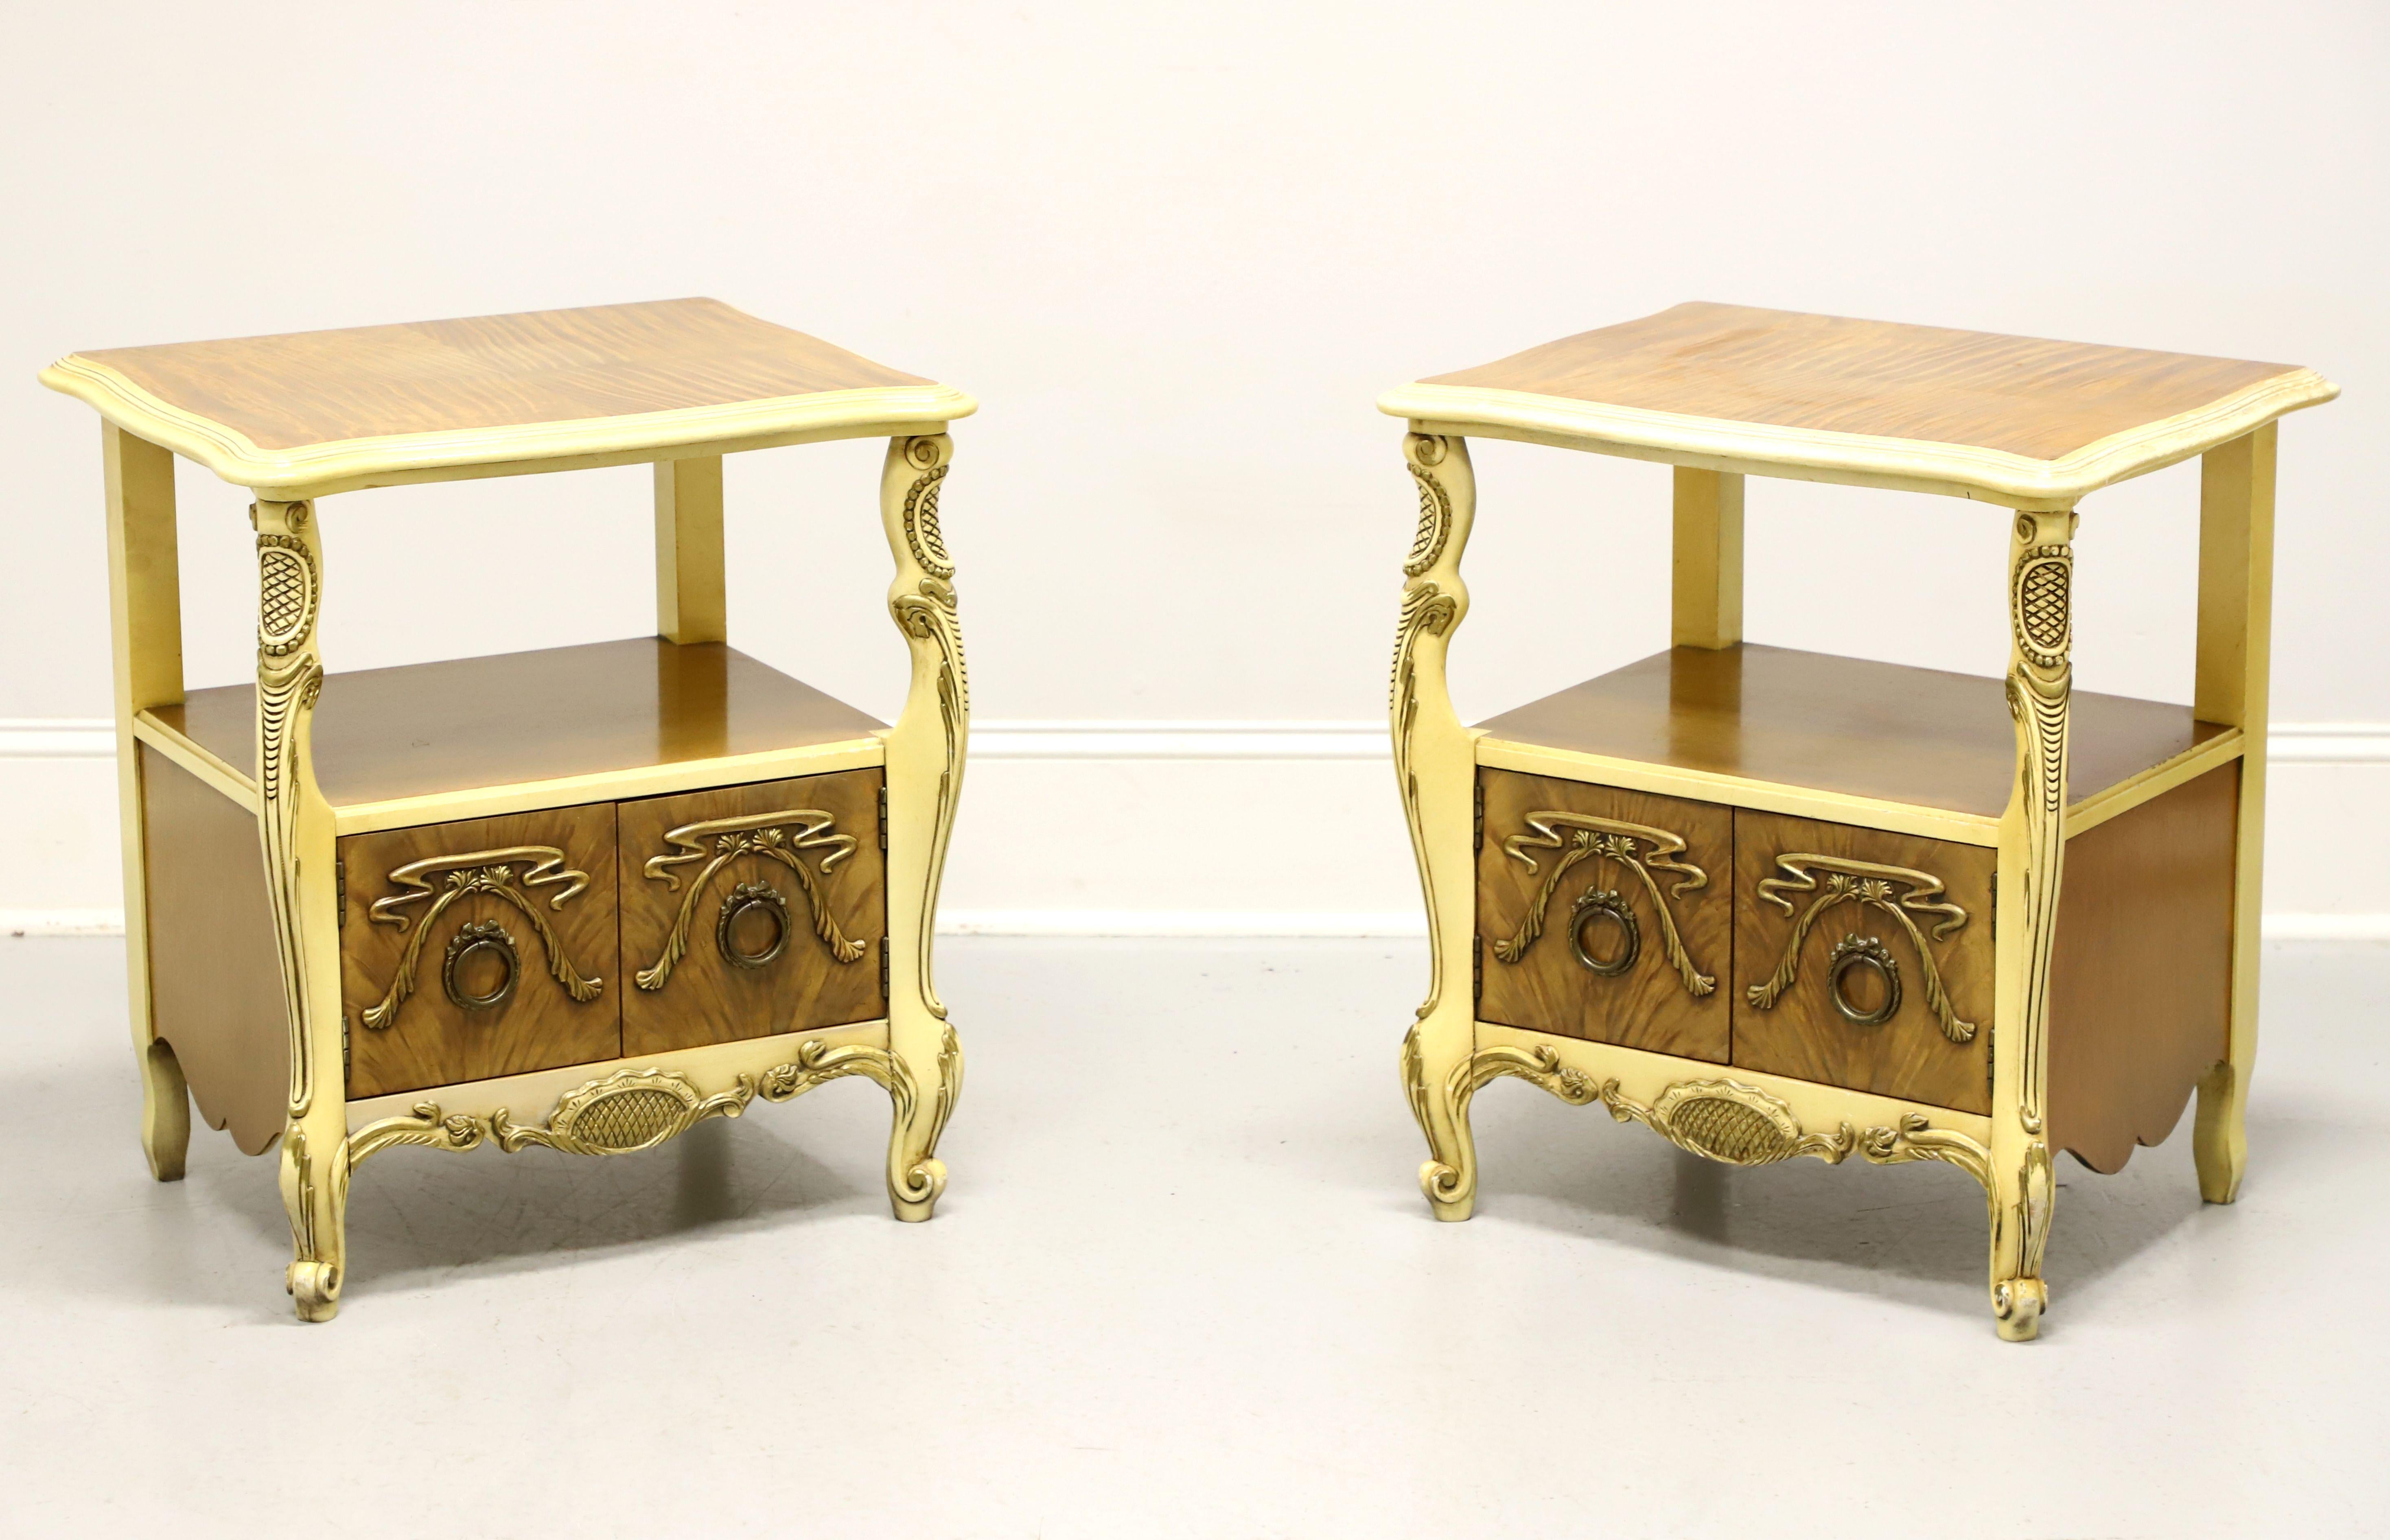 ROMWEBER Mid 20th Century Satinwood French Provincial Nightstands - Pair For Sale 7